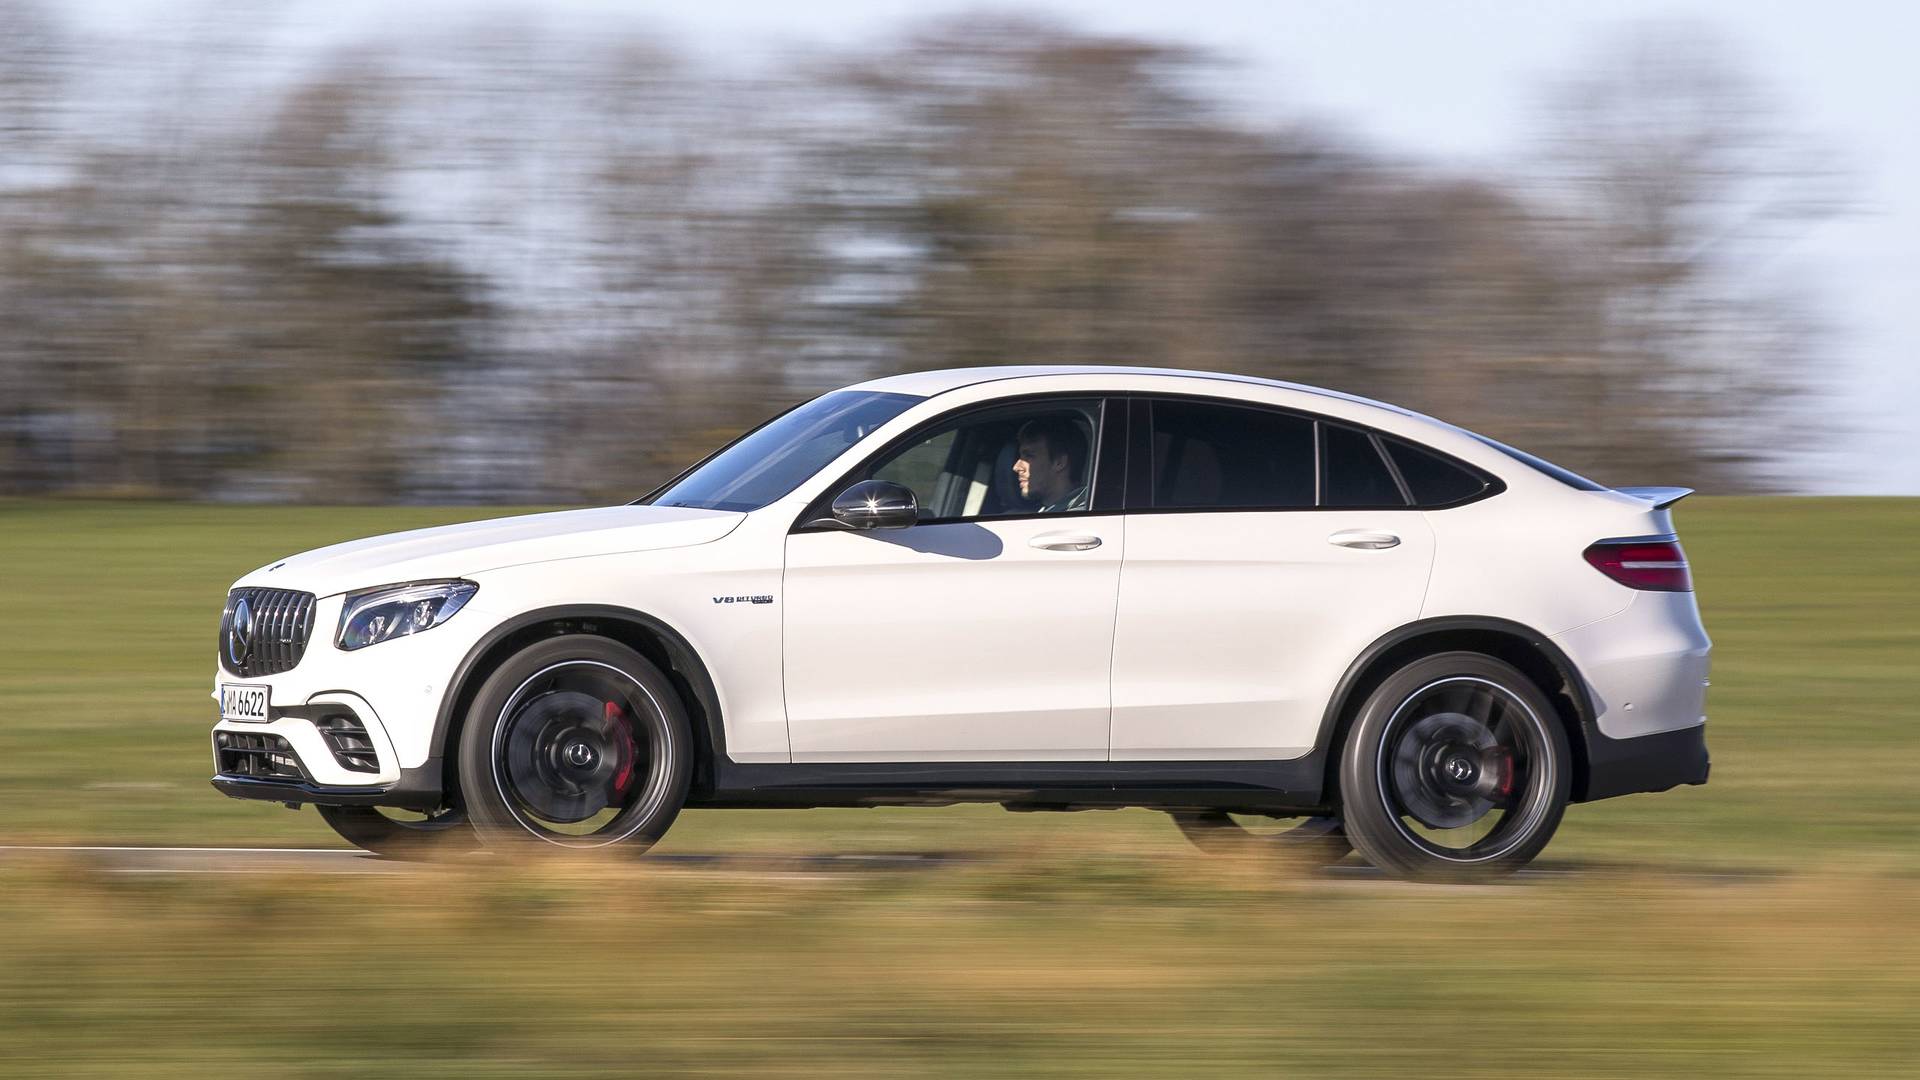 2018 Mercedes-AMG GLC63 Coupe First Drive: Because Why Not?